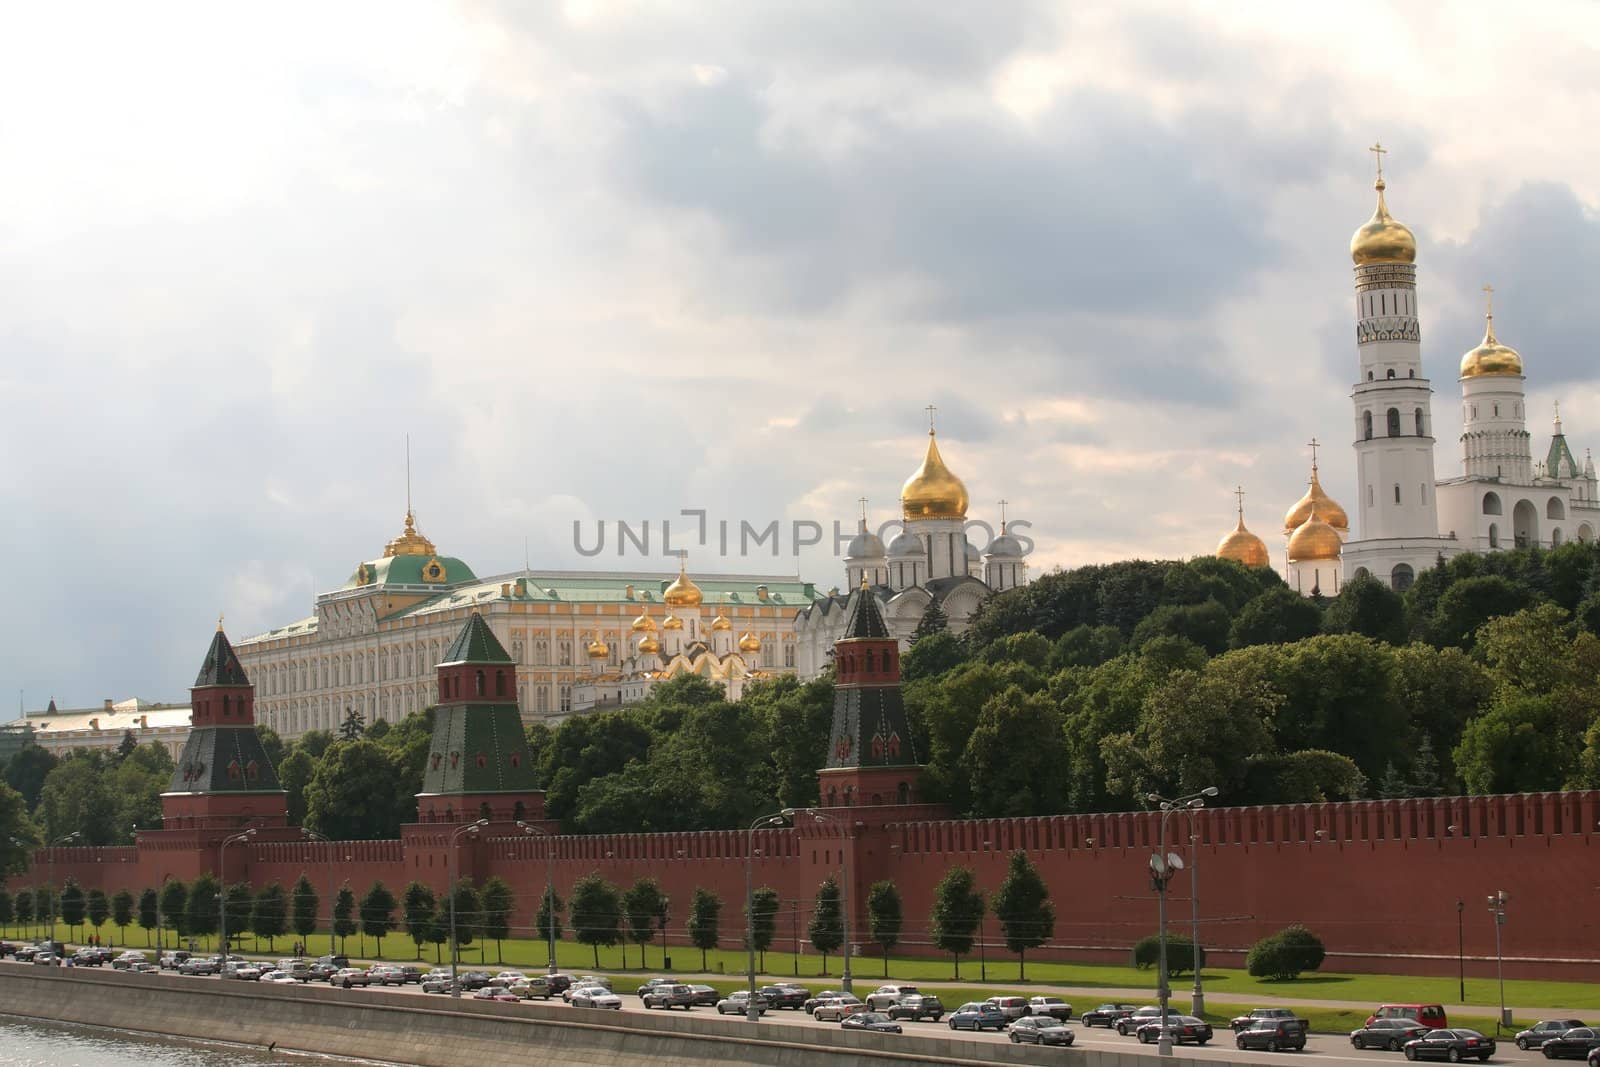 Russia, Moscow, Red Kremlin Wall with Tower and Orthodox Temple on Territory Flint